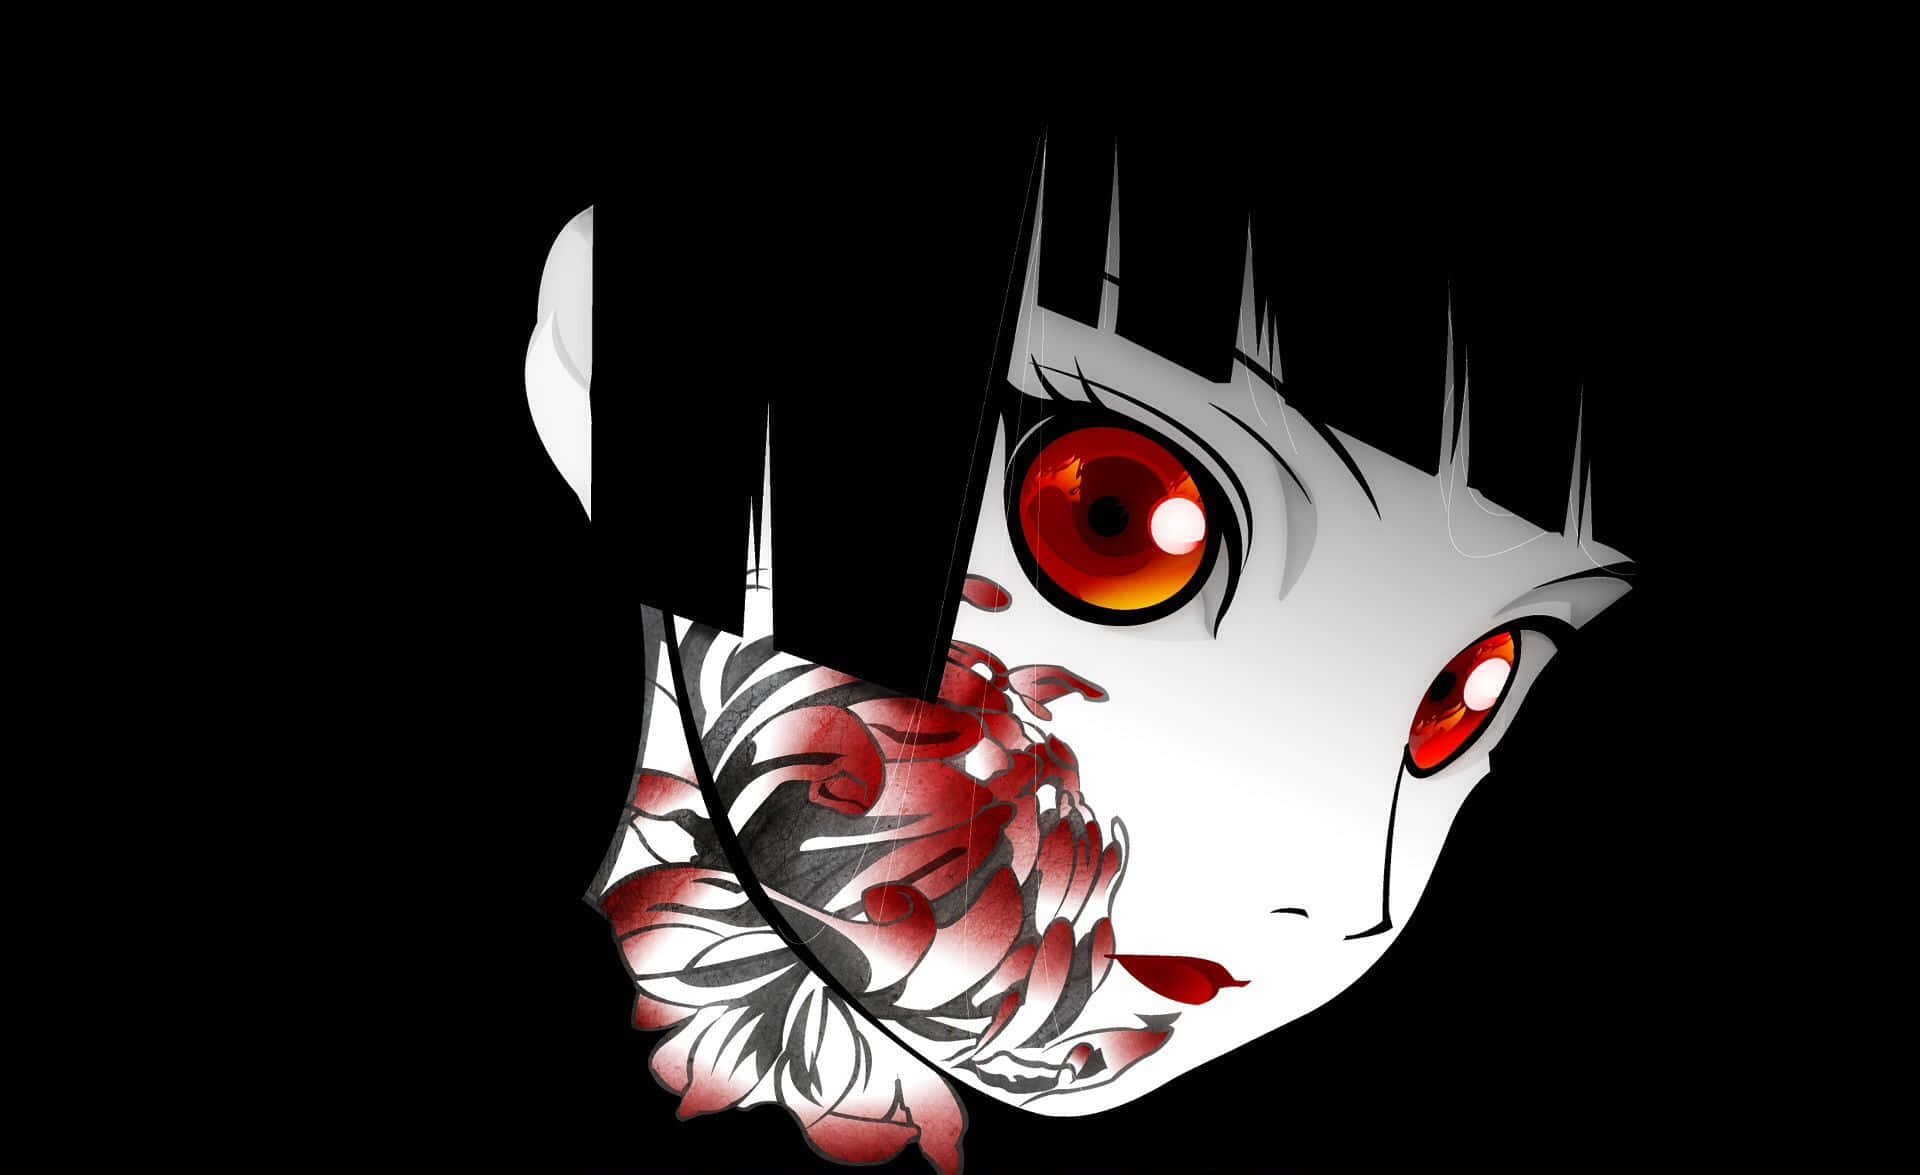 Step into a World of Doom and Terror with Horror Anime Wallpaper